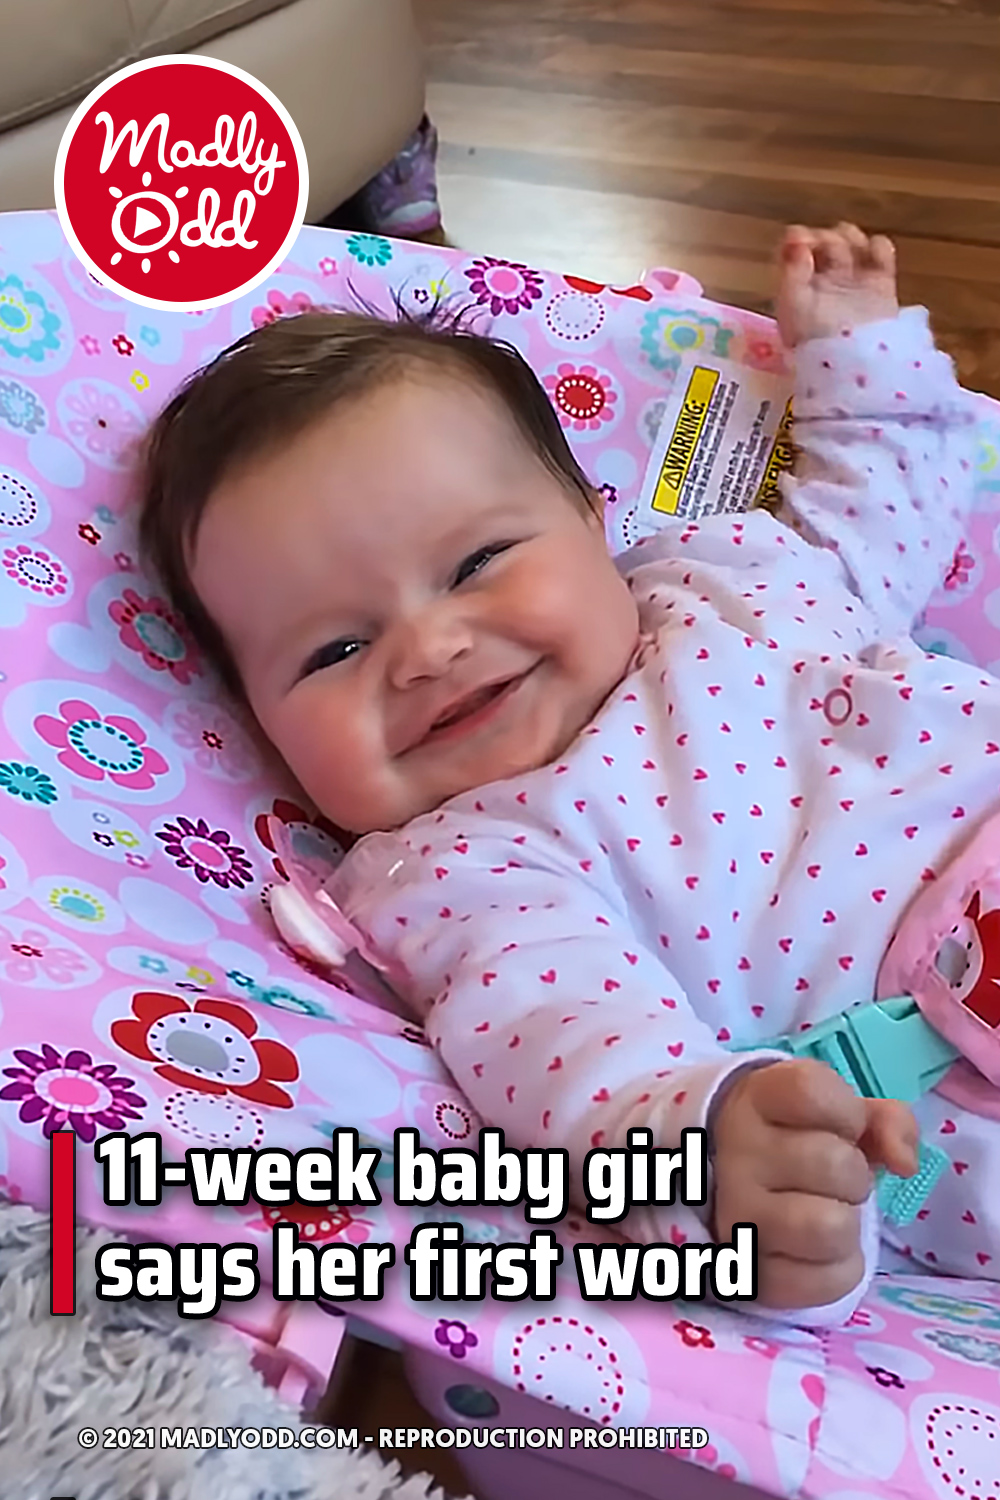 11-week baby girl says her first word